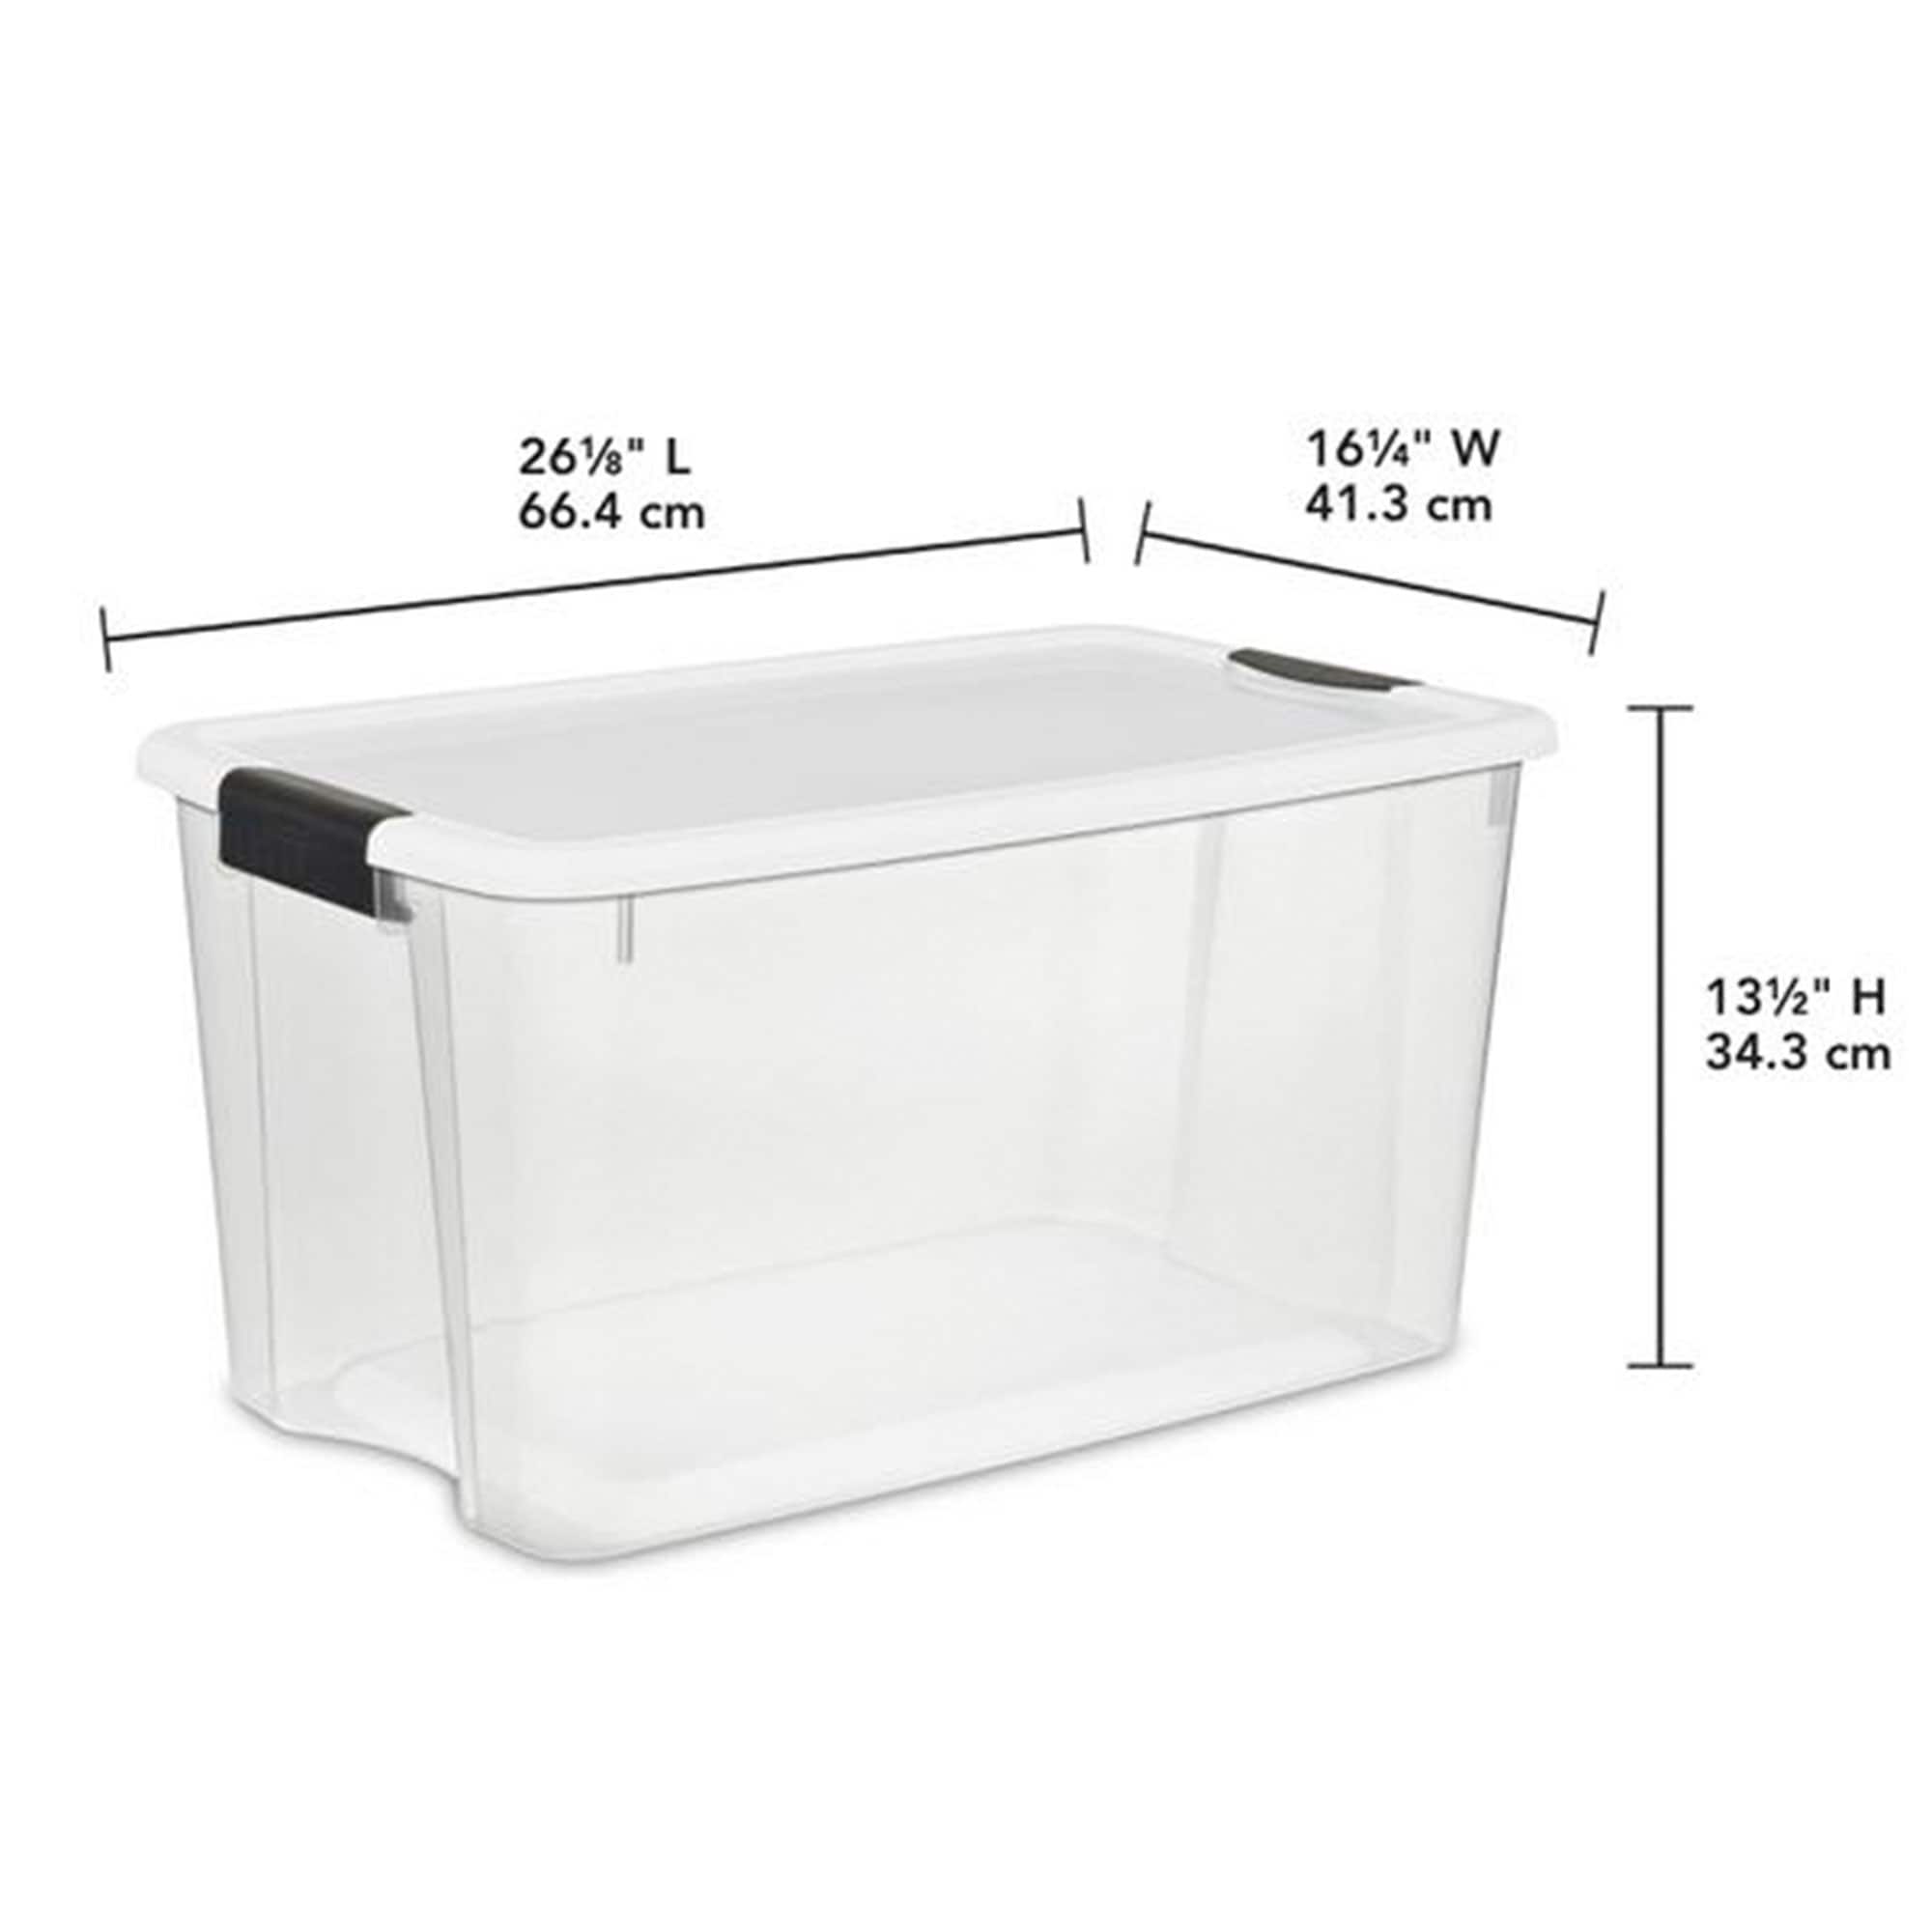 19 qt. Plastic Stackable Storage Bins for Pantry in White (4-Pack)